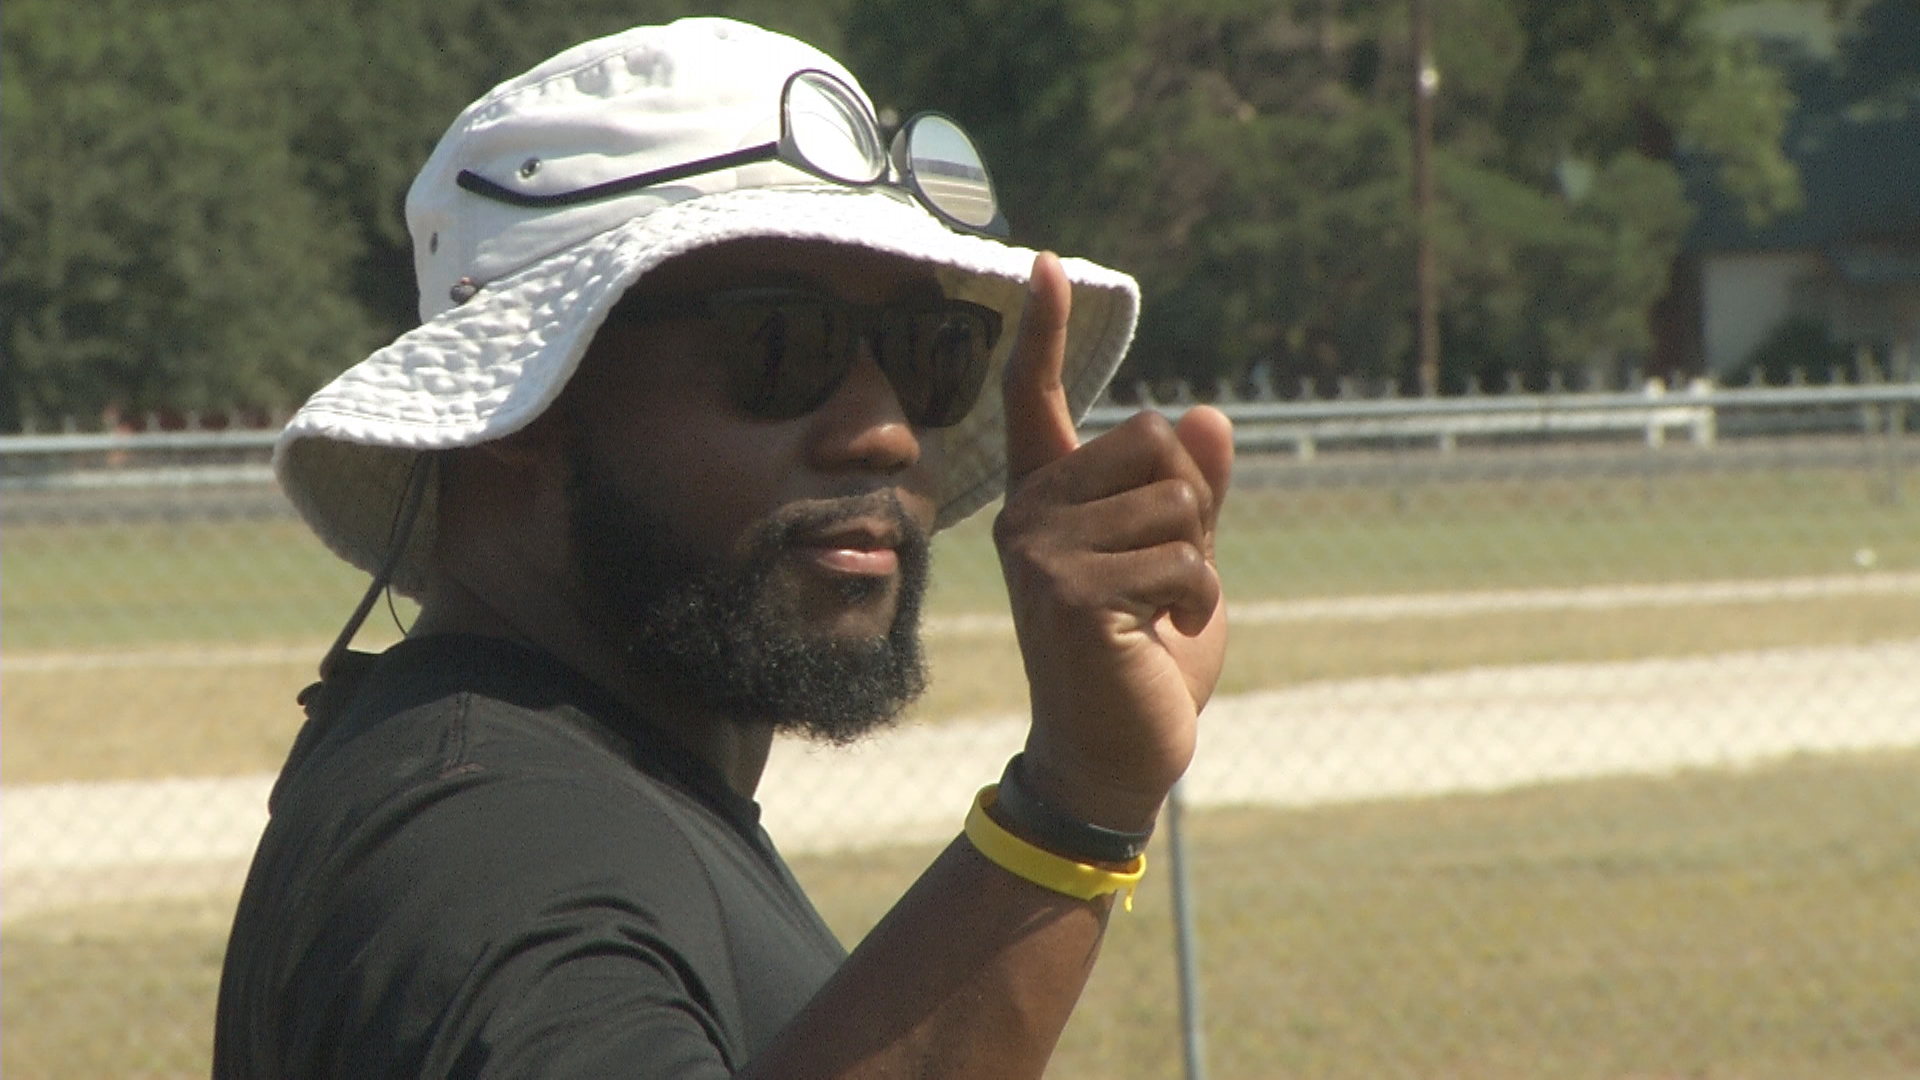 The Marlin Bulldogs have a new coach in 2019 but are ready to restore once-proud traditions.